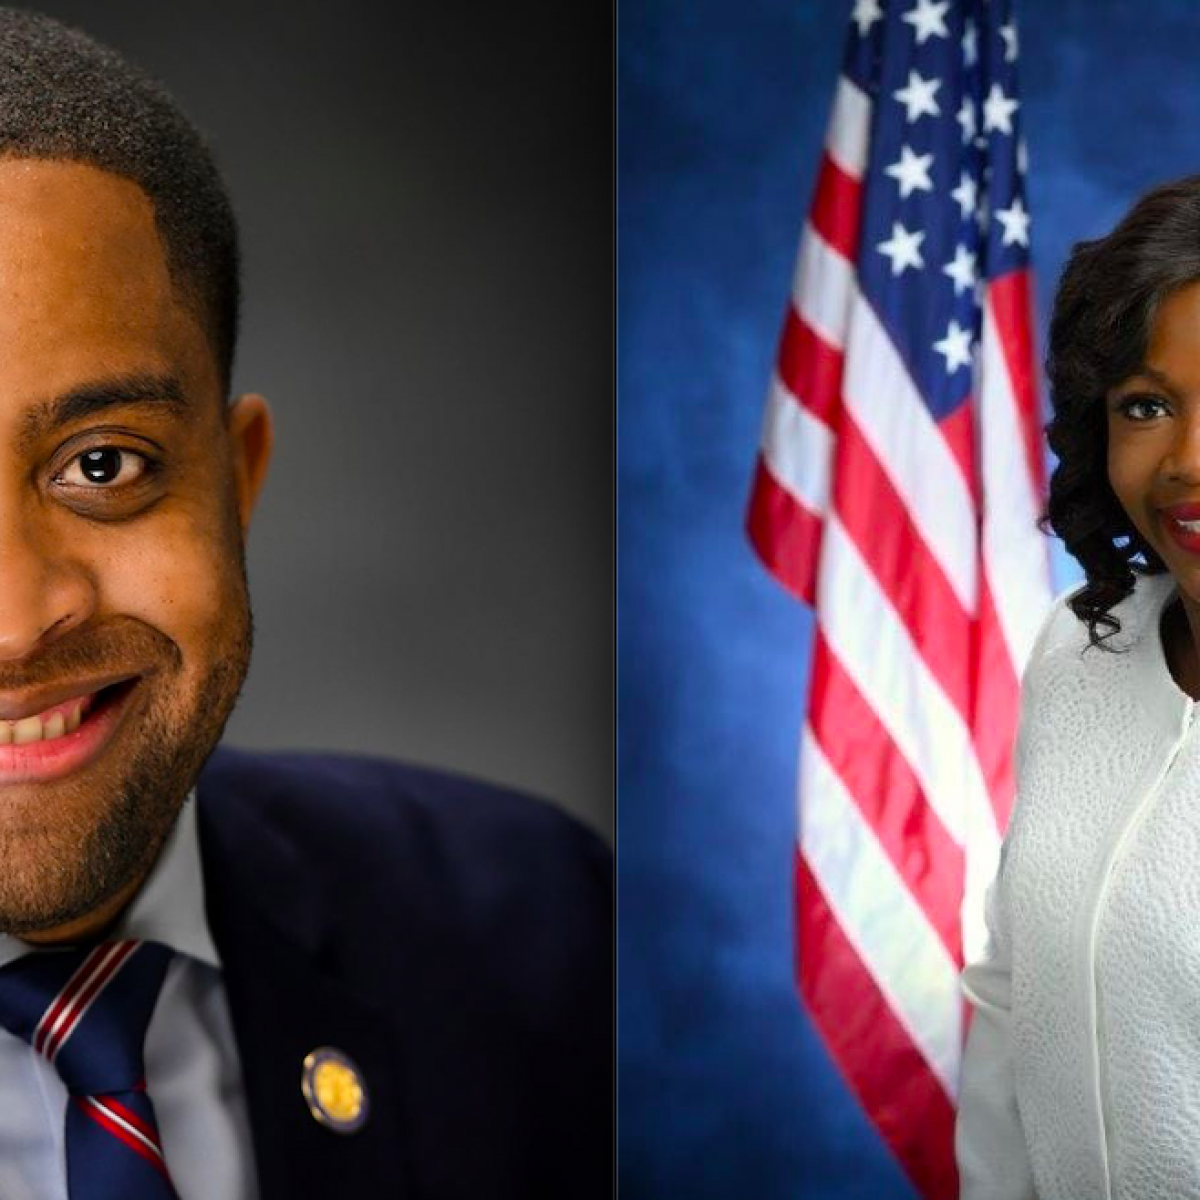 These Black Legislators Went Out To Protest With Constituents…And Then They Got Pepper Sprayed